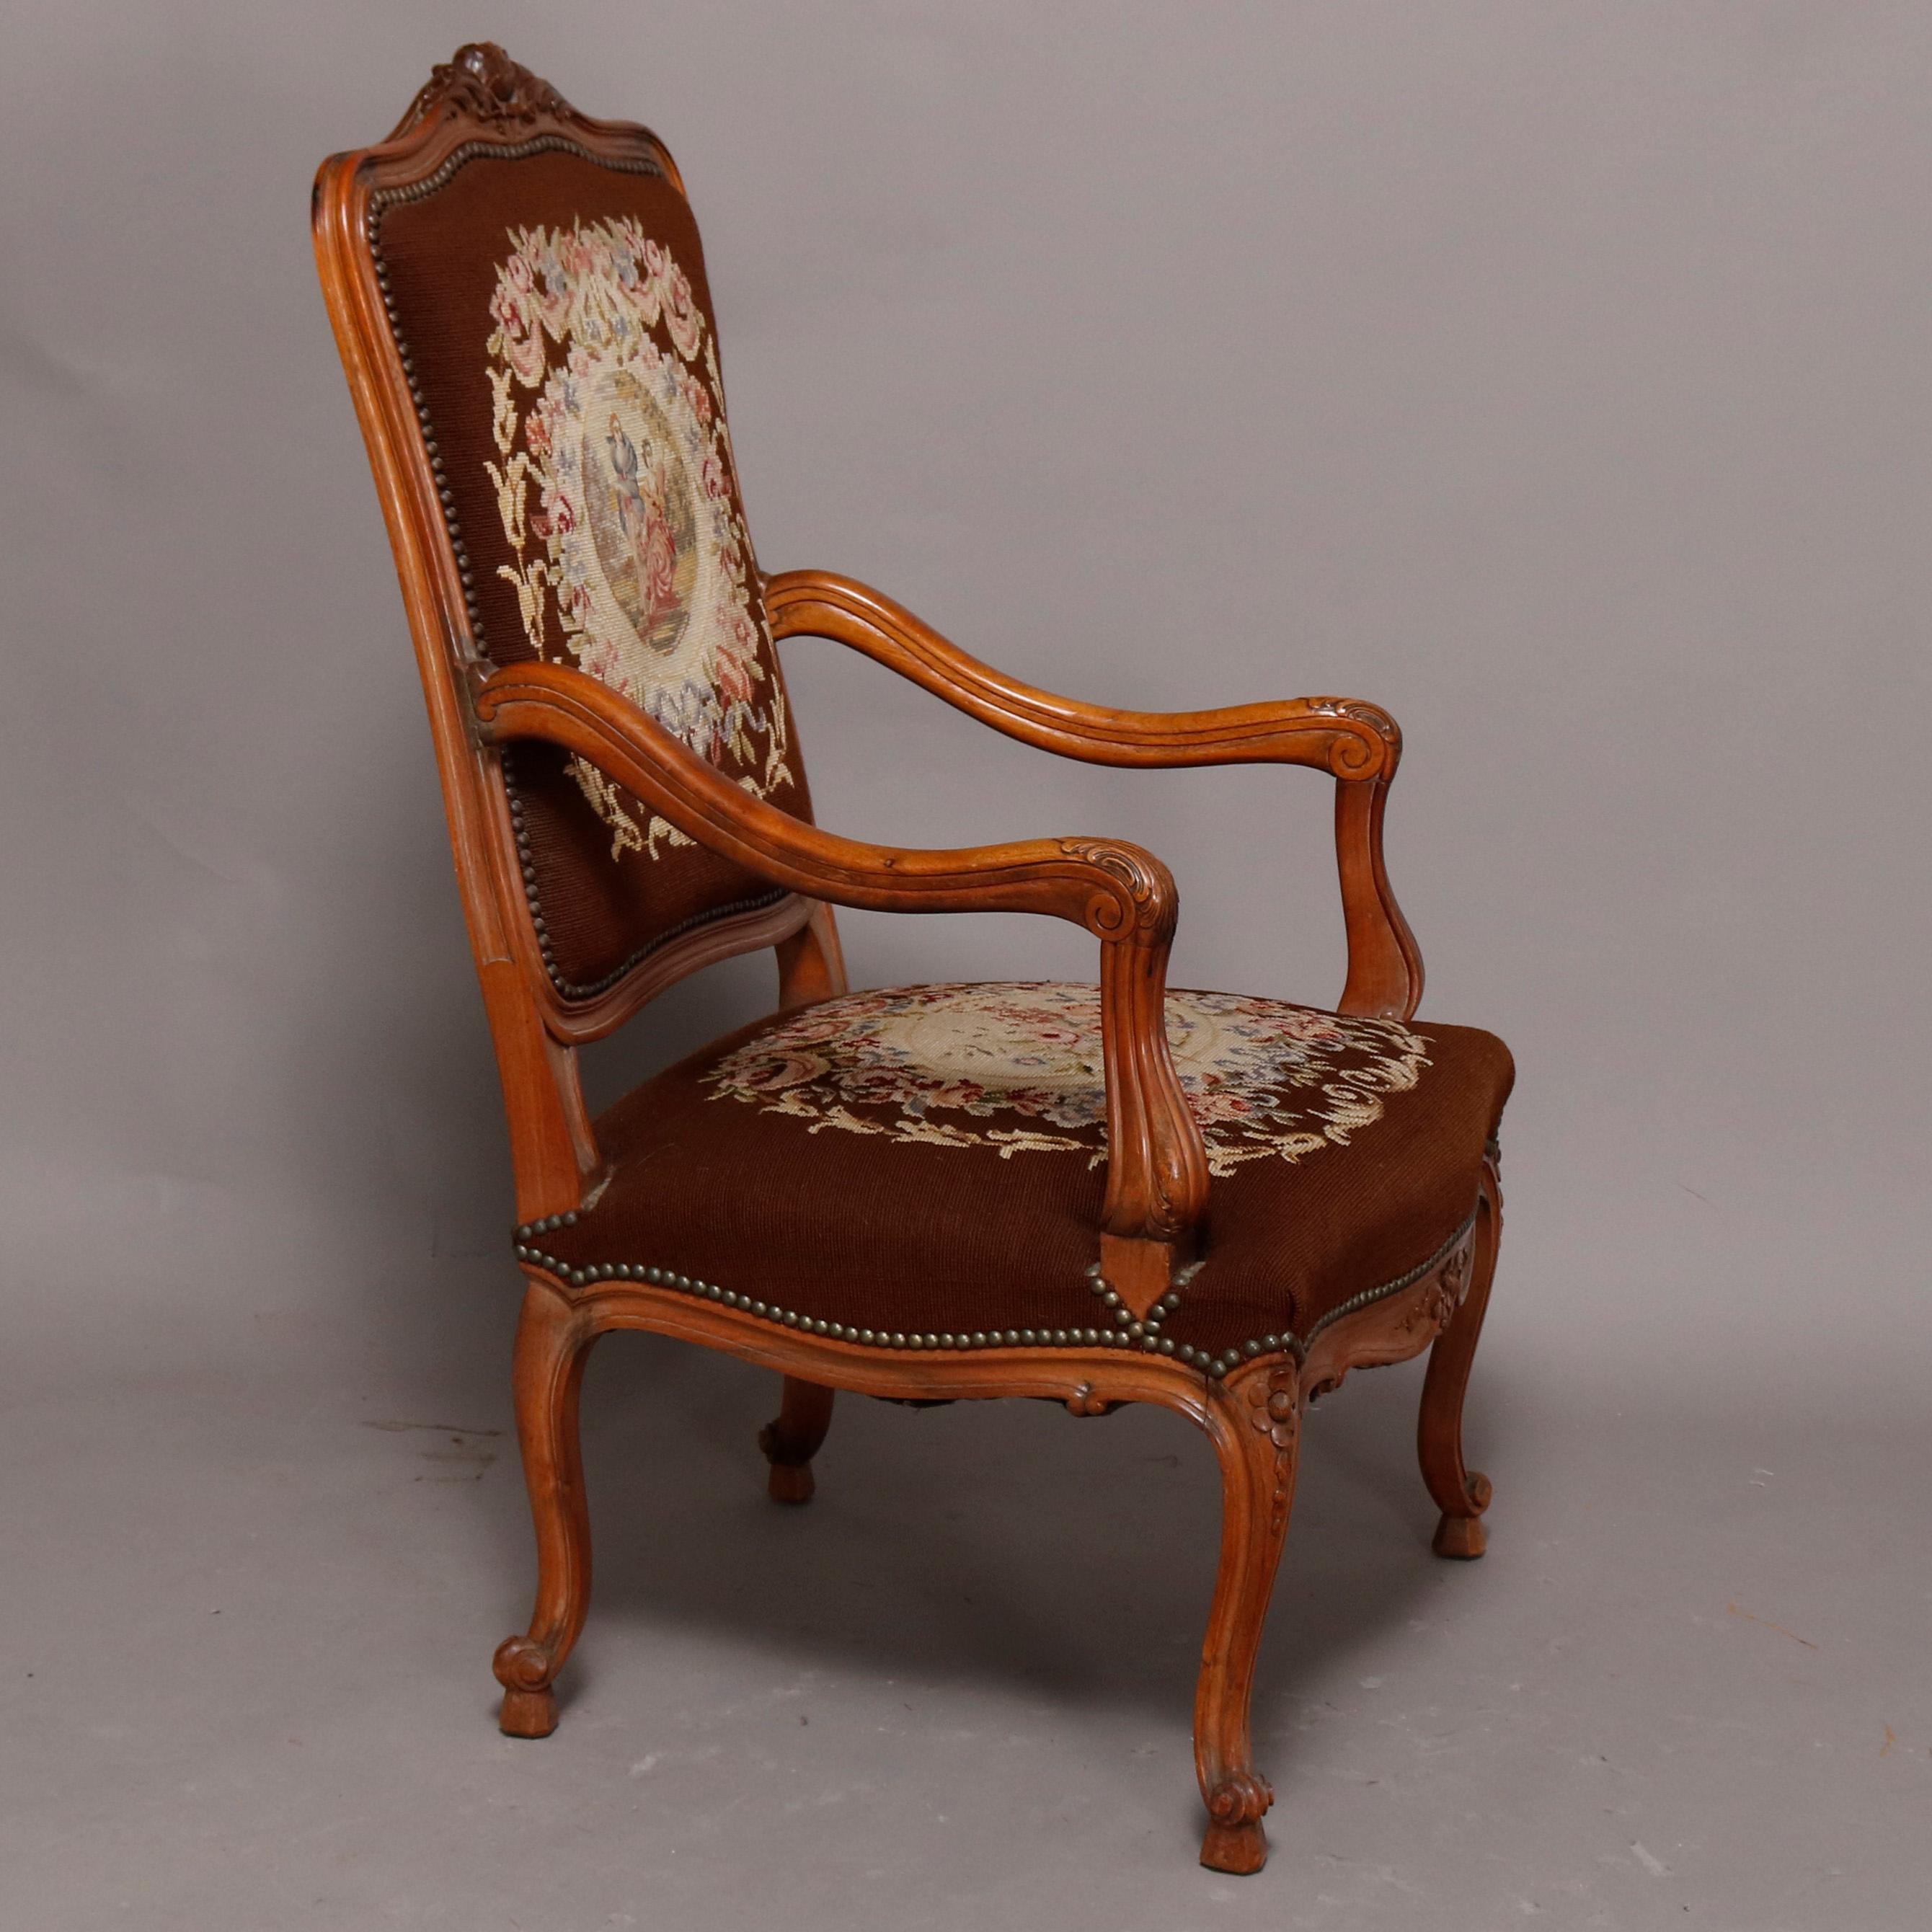 An antique French Louis XV fauteuil offers fruitwood frame with carved floral and foliate crest and skirt, shaped arms and raised on cabriole legs terminating in scroll feet, upholstered in needlepoint with seat having floral reserve and back with